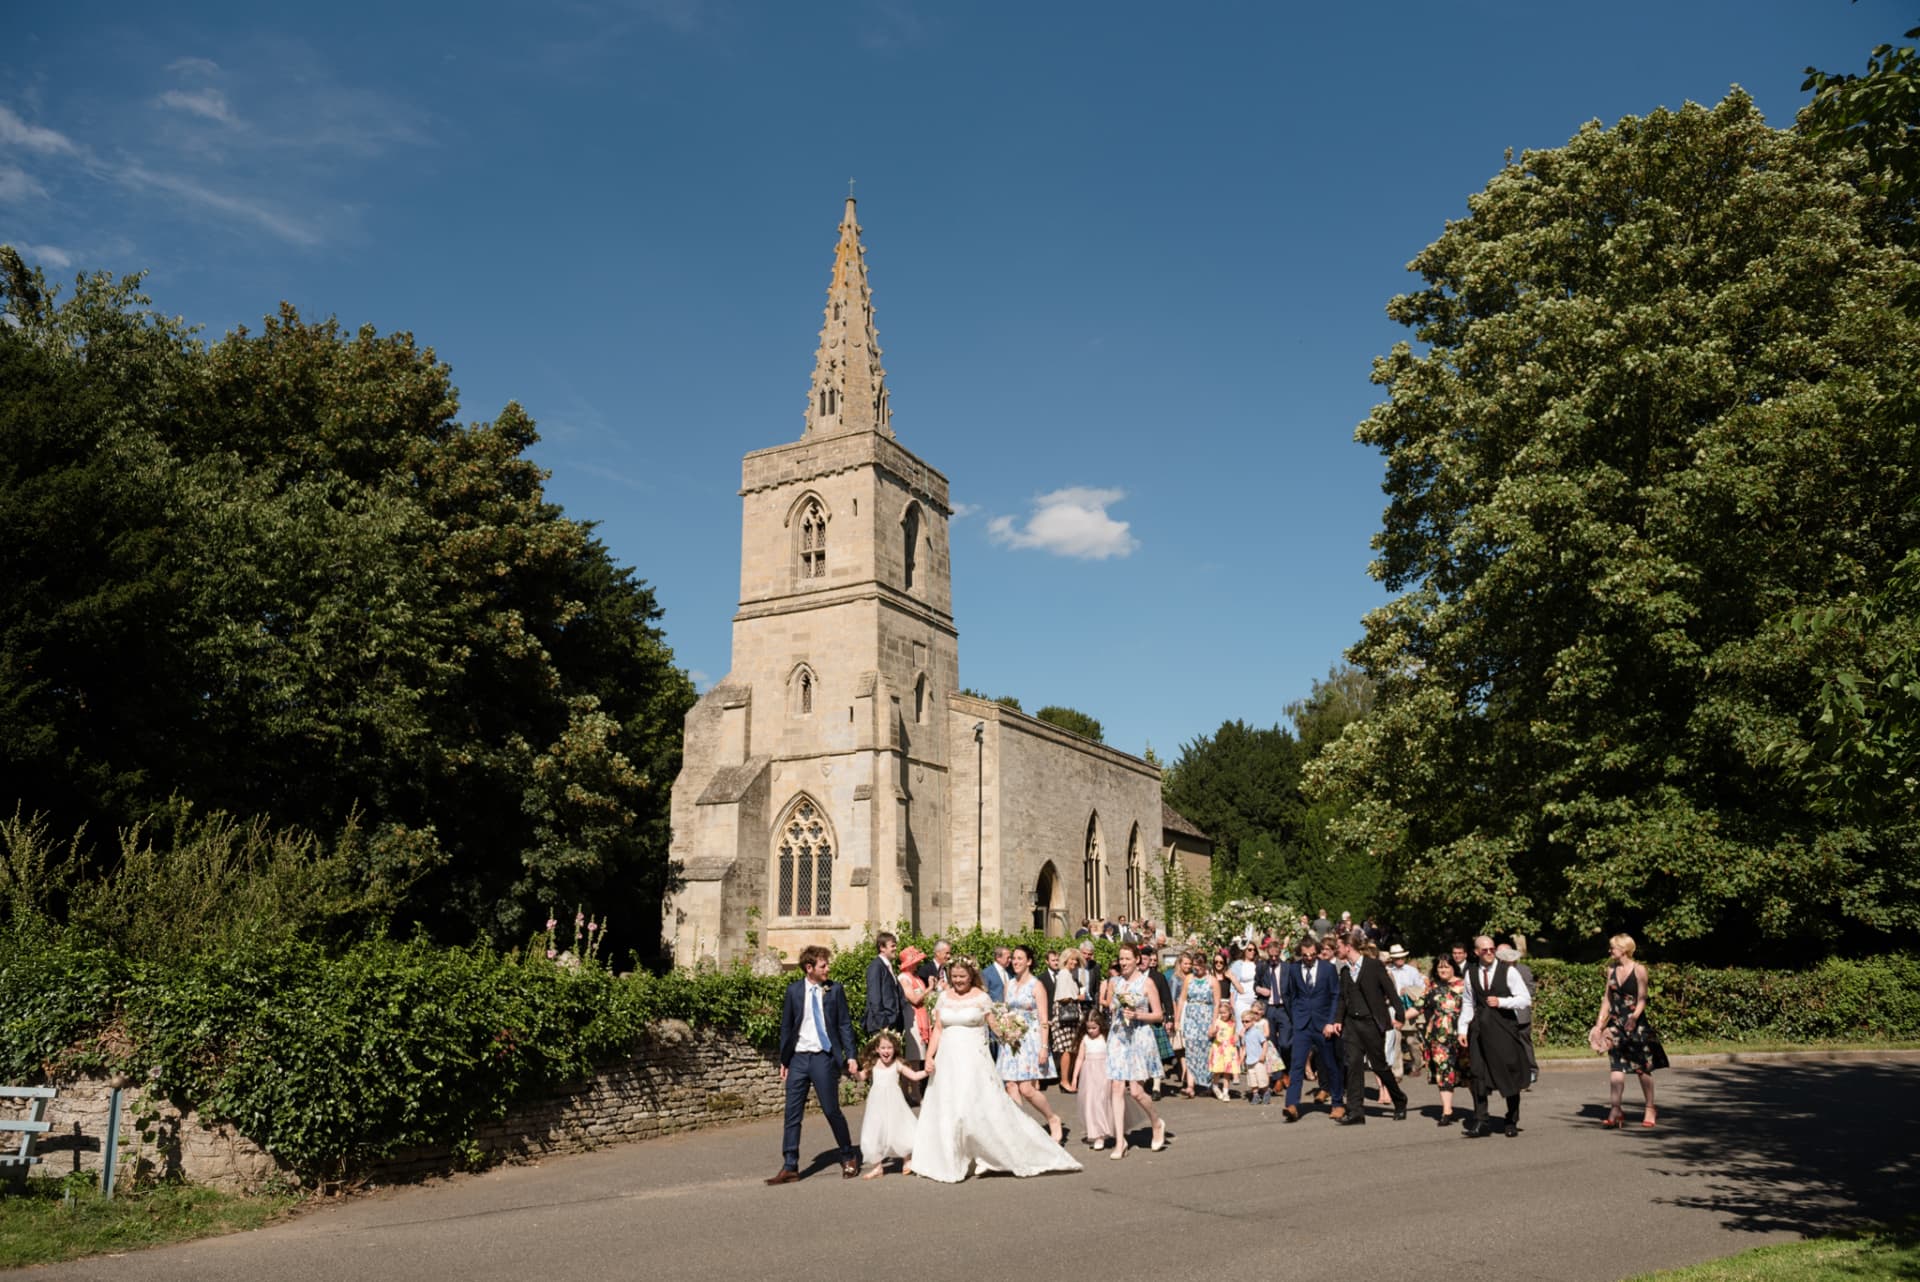 Bright blue sky behind couple leaving church